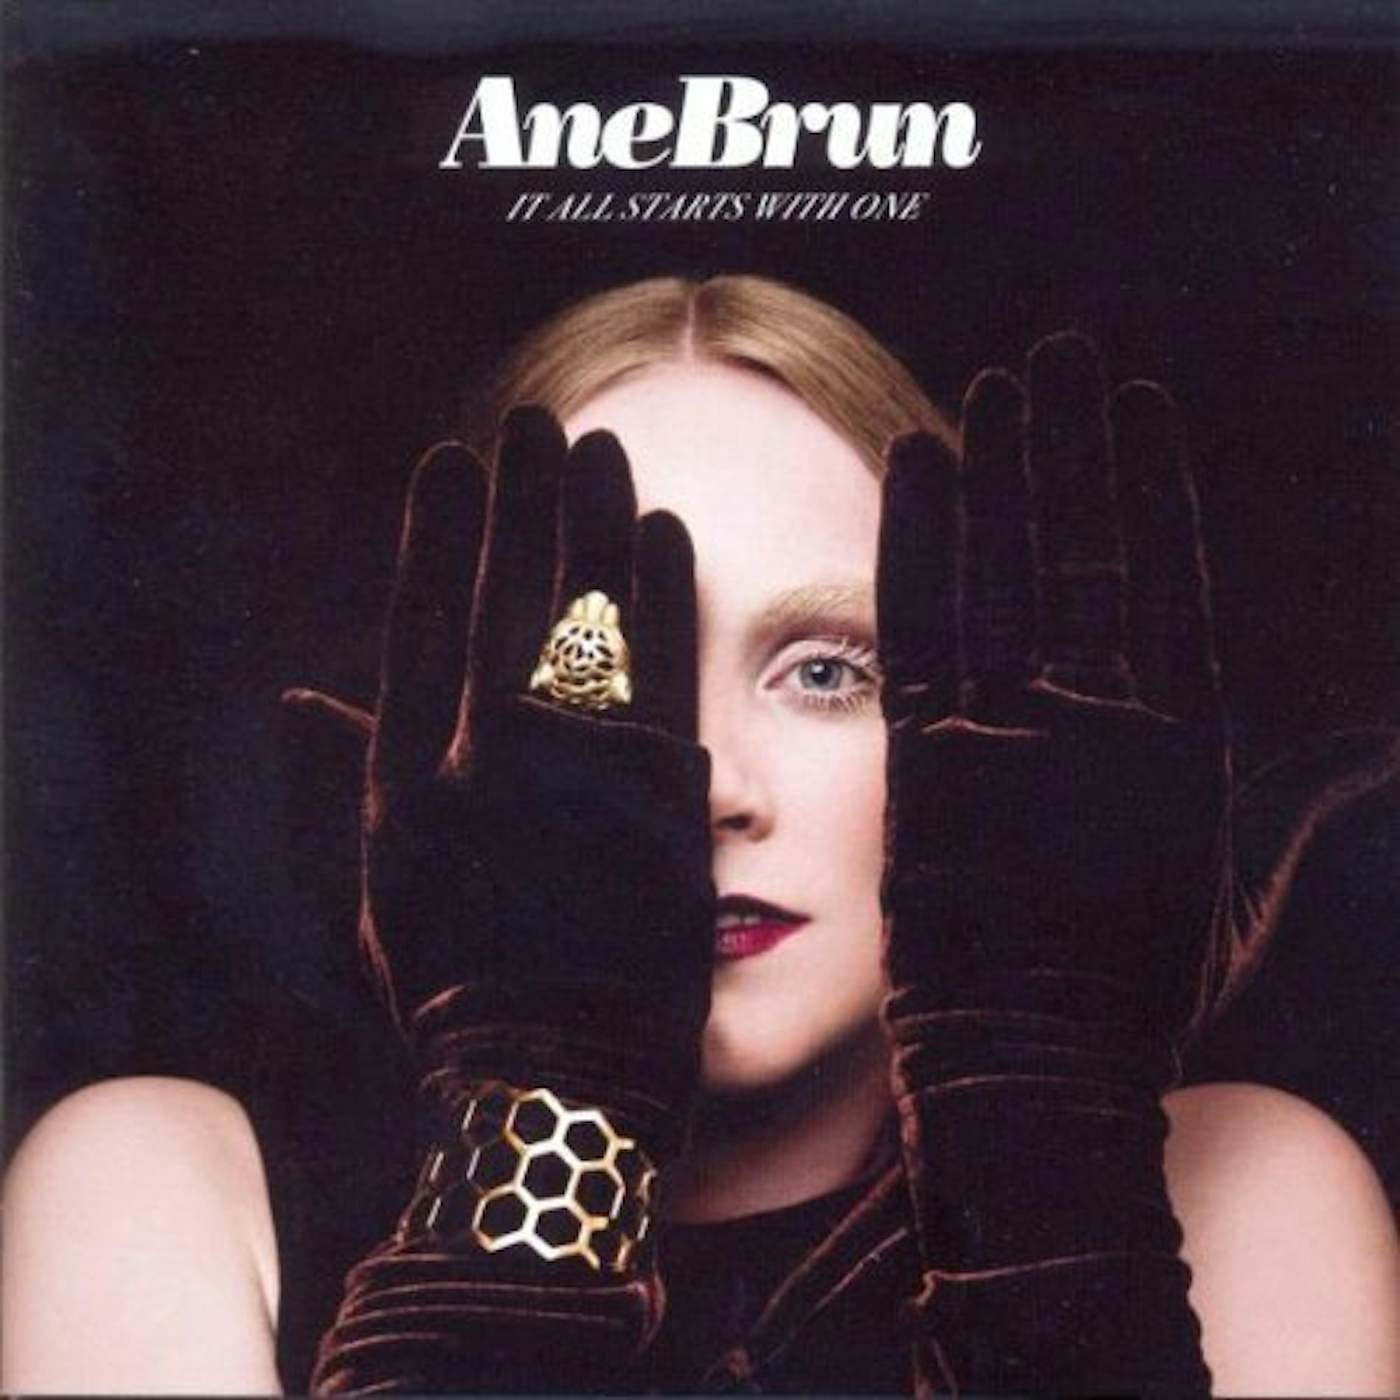 Ane Brun It All Starts With One Vinyl Record